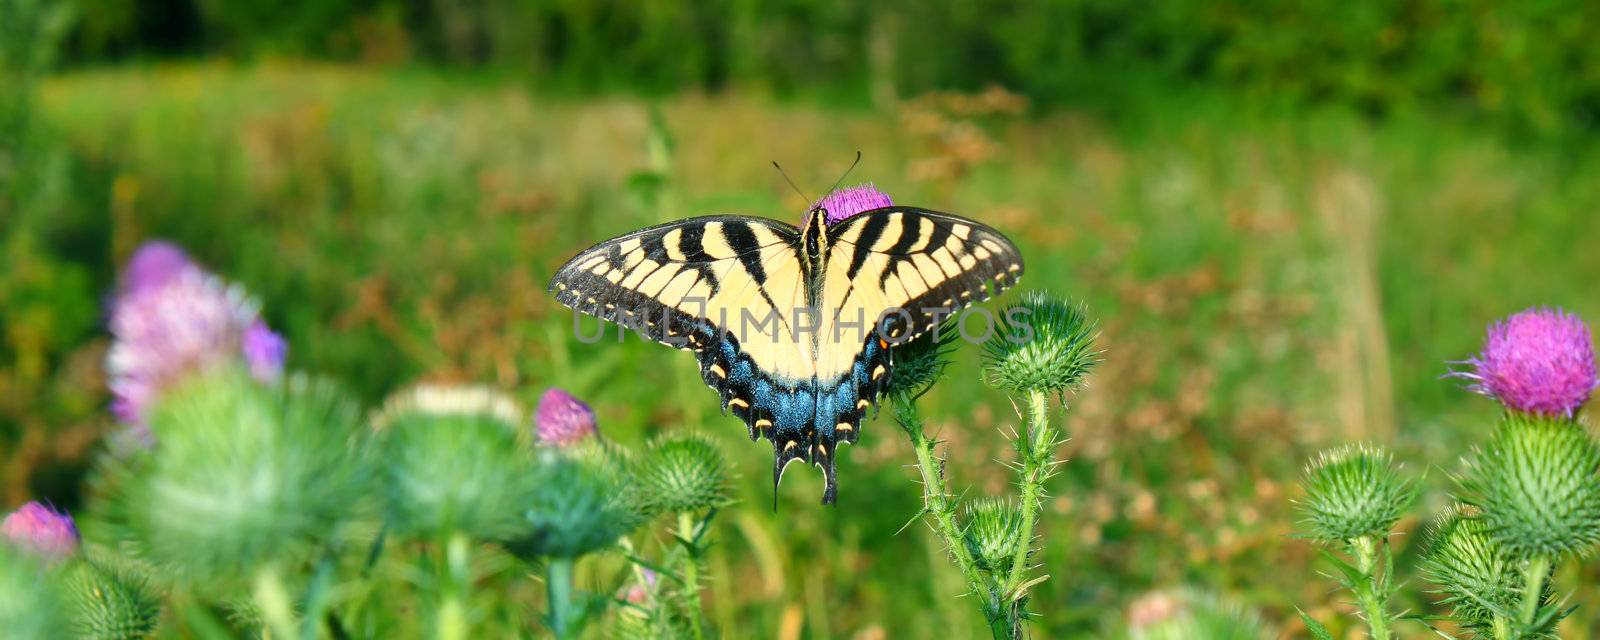 Tiger Swallowtail in Illinois by Wirepec